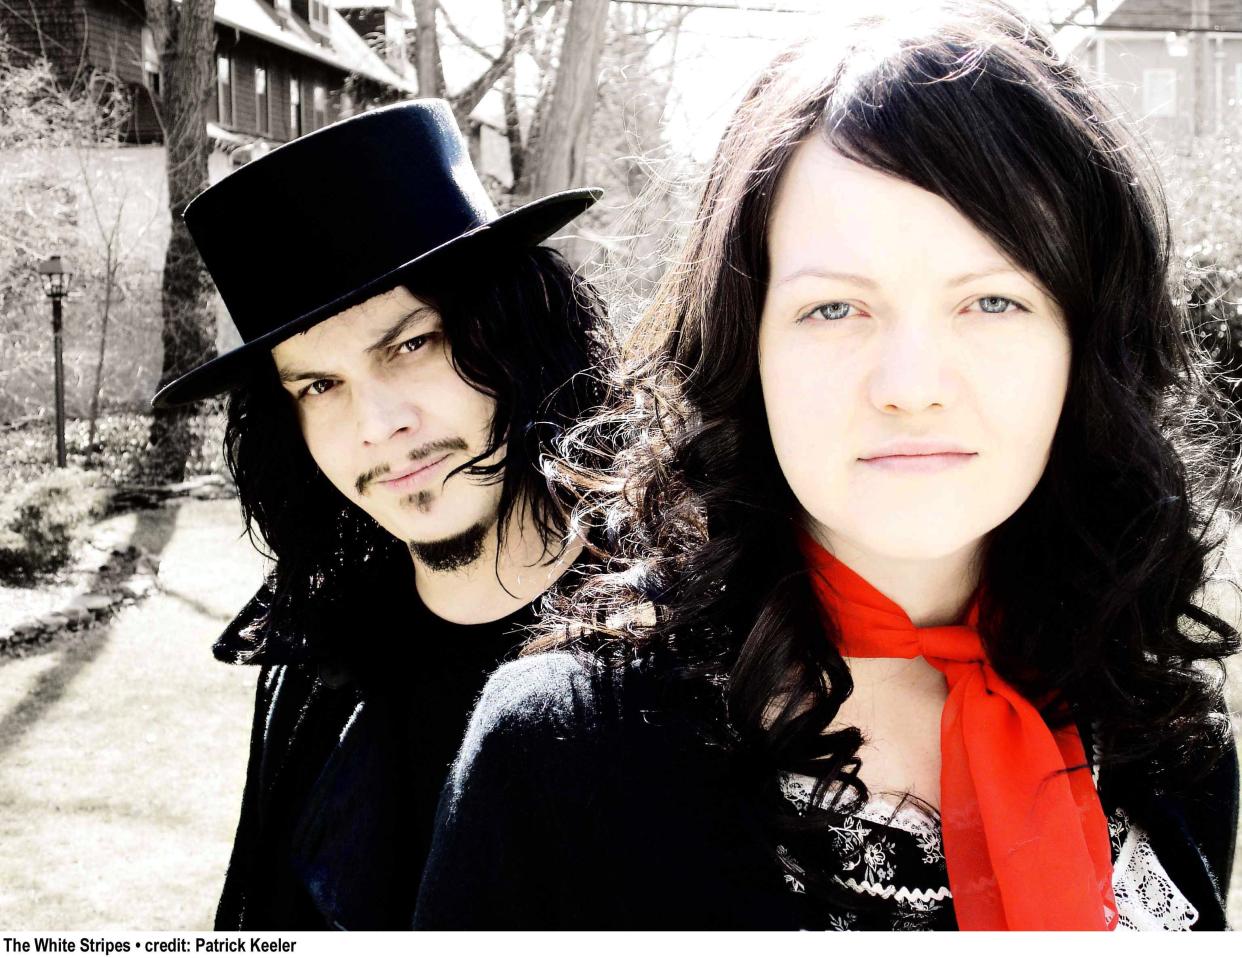 The White Stripes members Jack White and Meg White photographed on June 5, 2005.